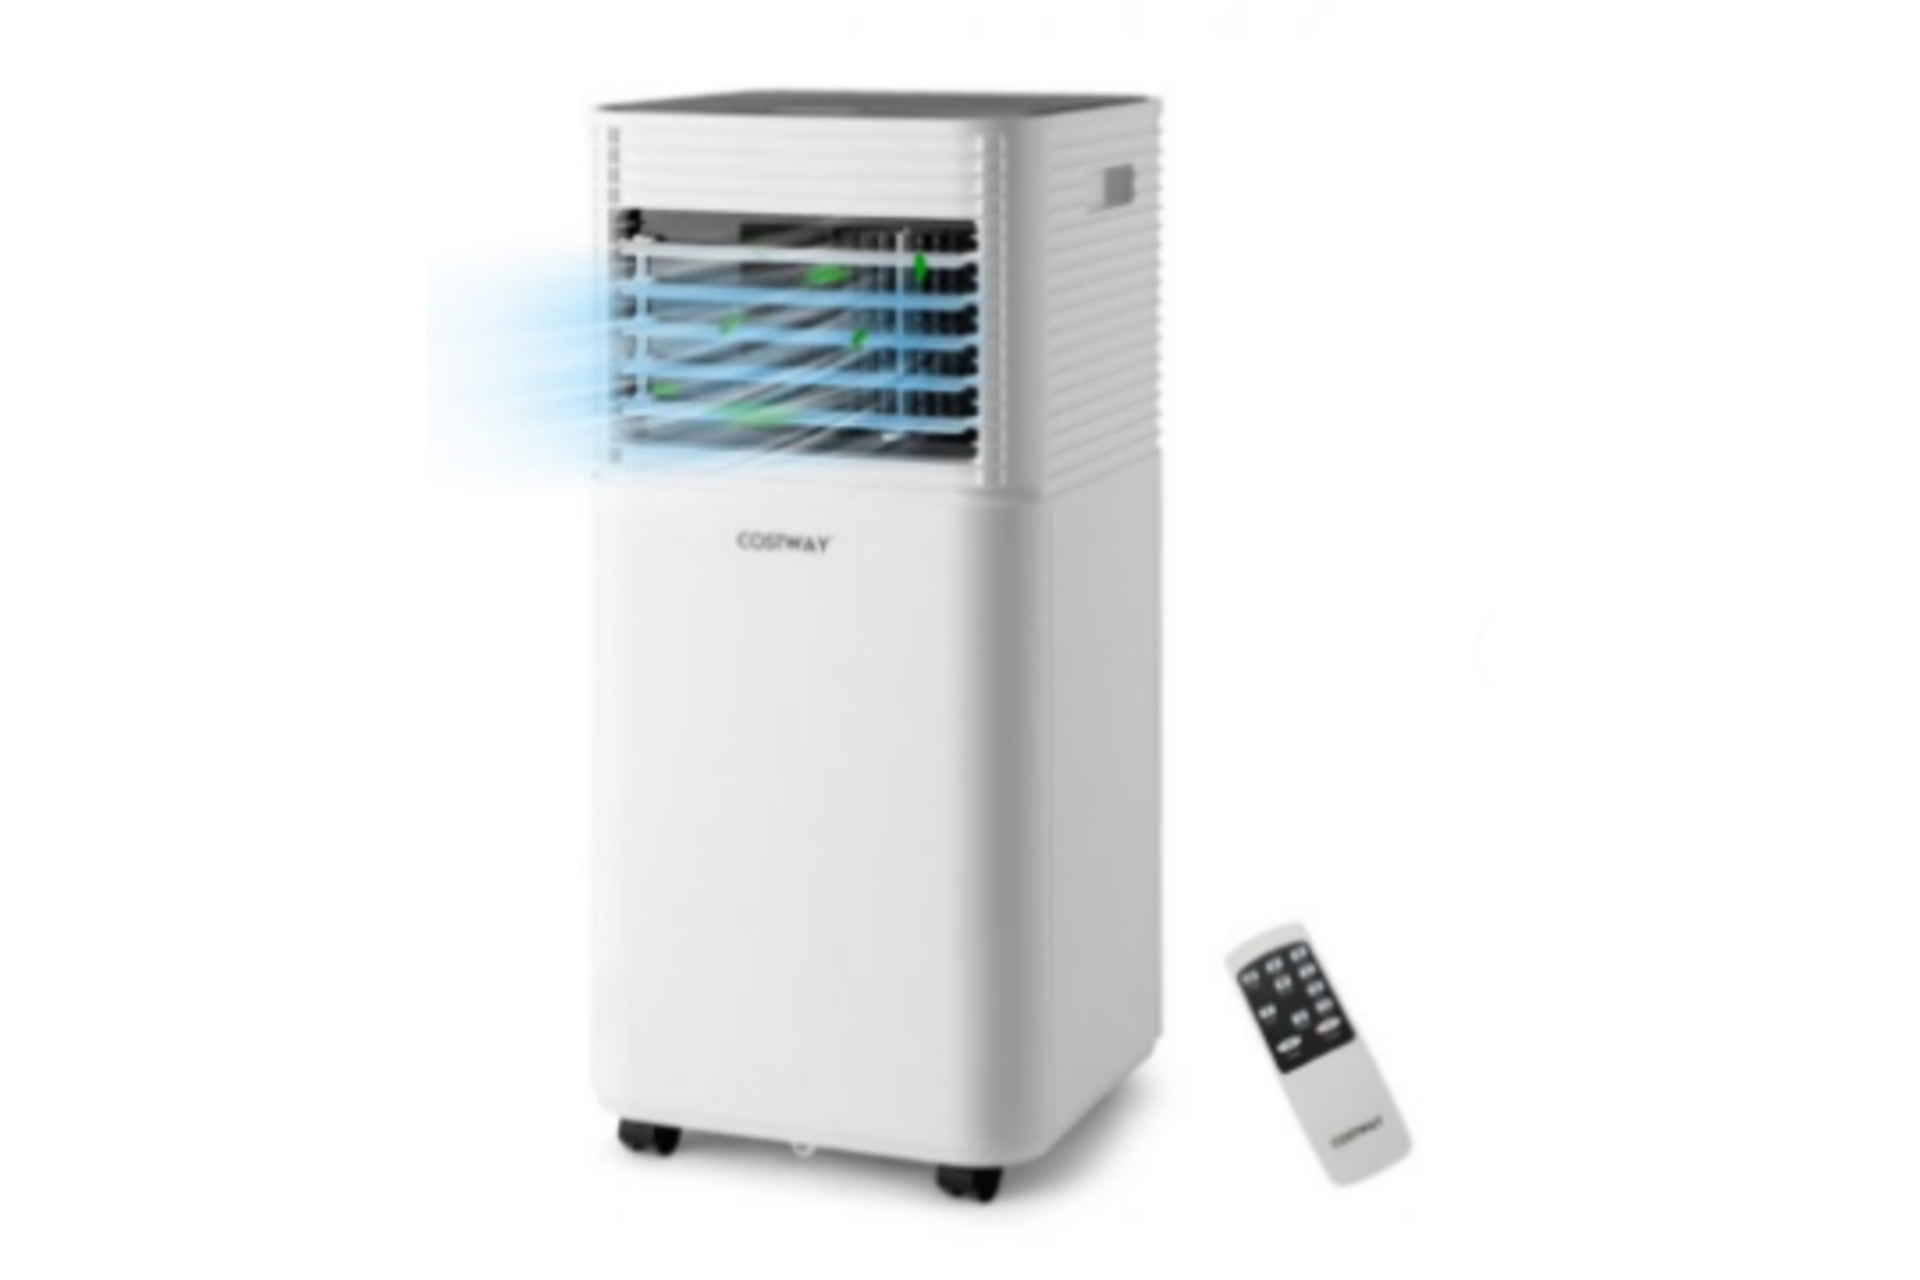 7000 BTU Portable Air Conditioner with 2 Wind Speeds and Timer (R50)ãŽ¡, which is suitable for the